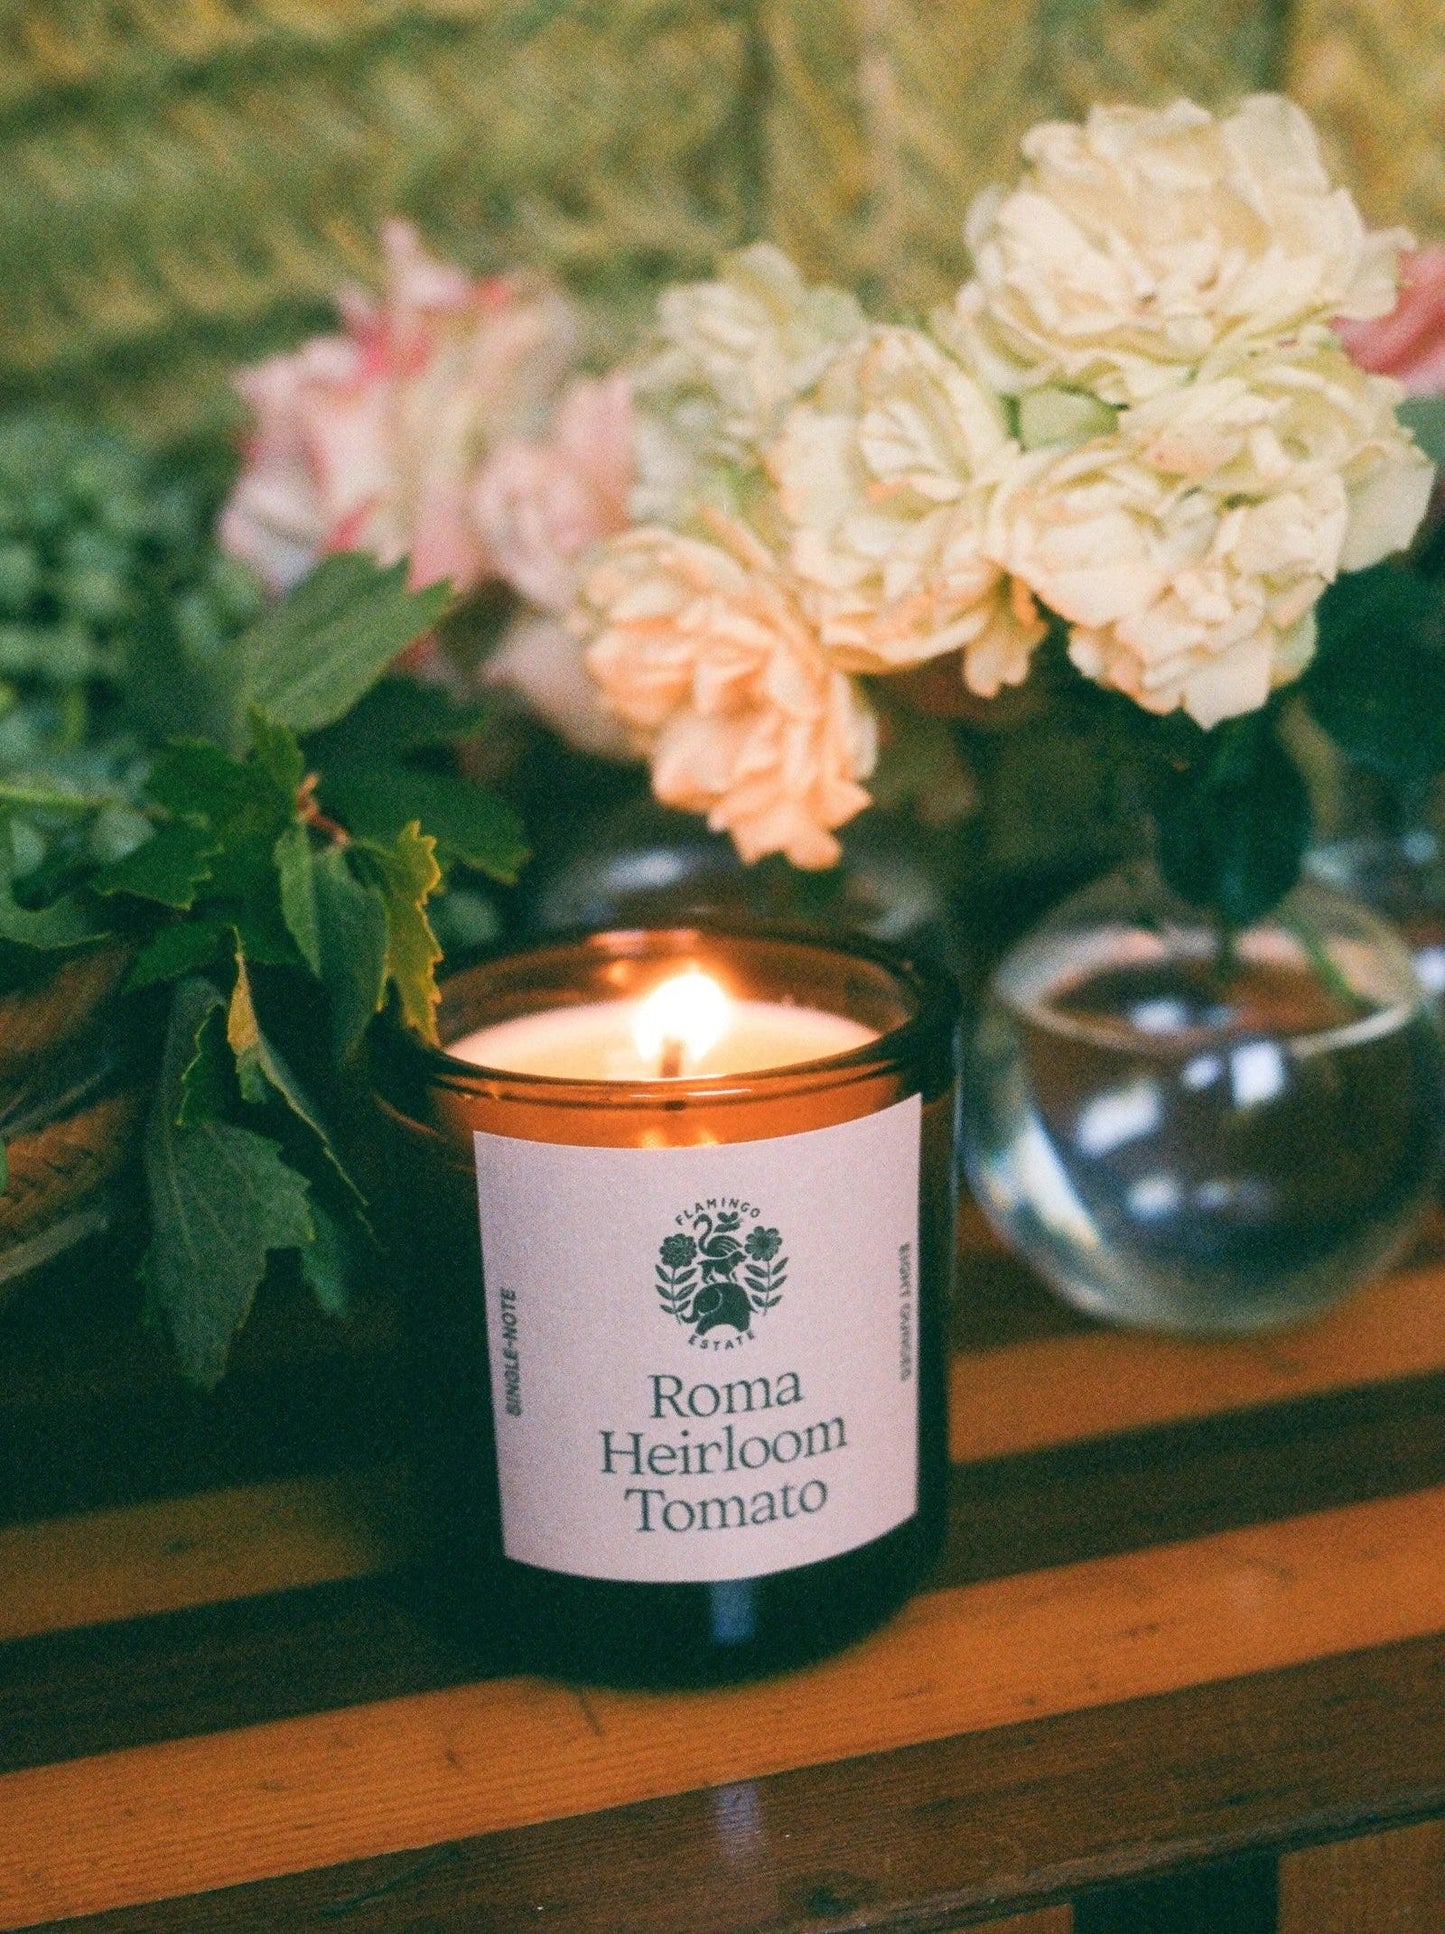 Roma Heirloom Tomato Candle by Flamingo Estate - Haven